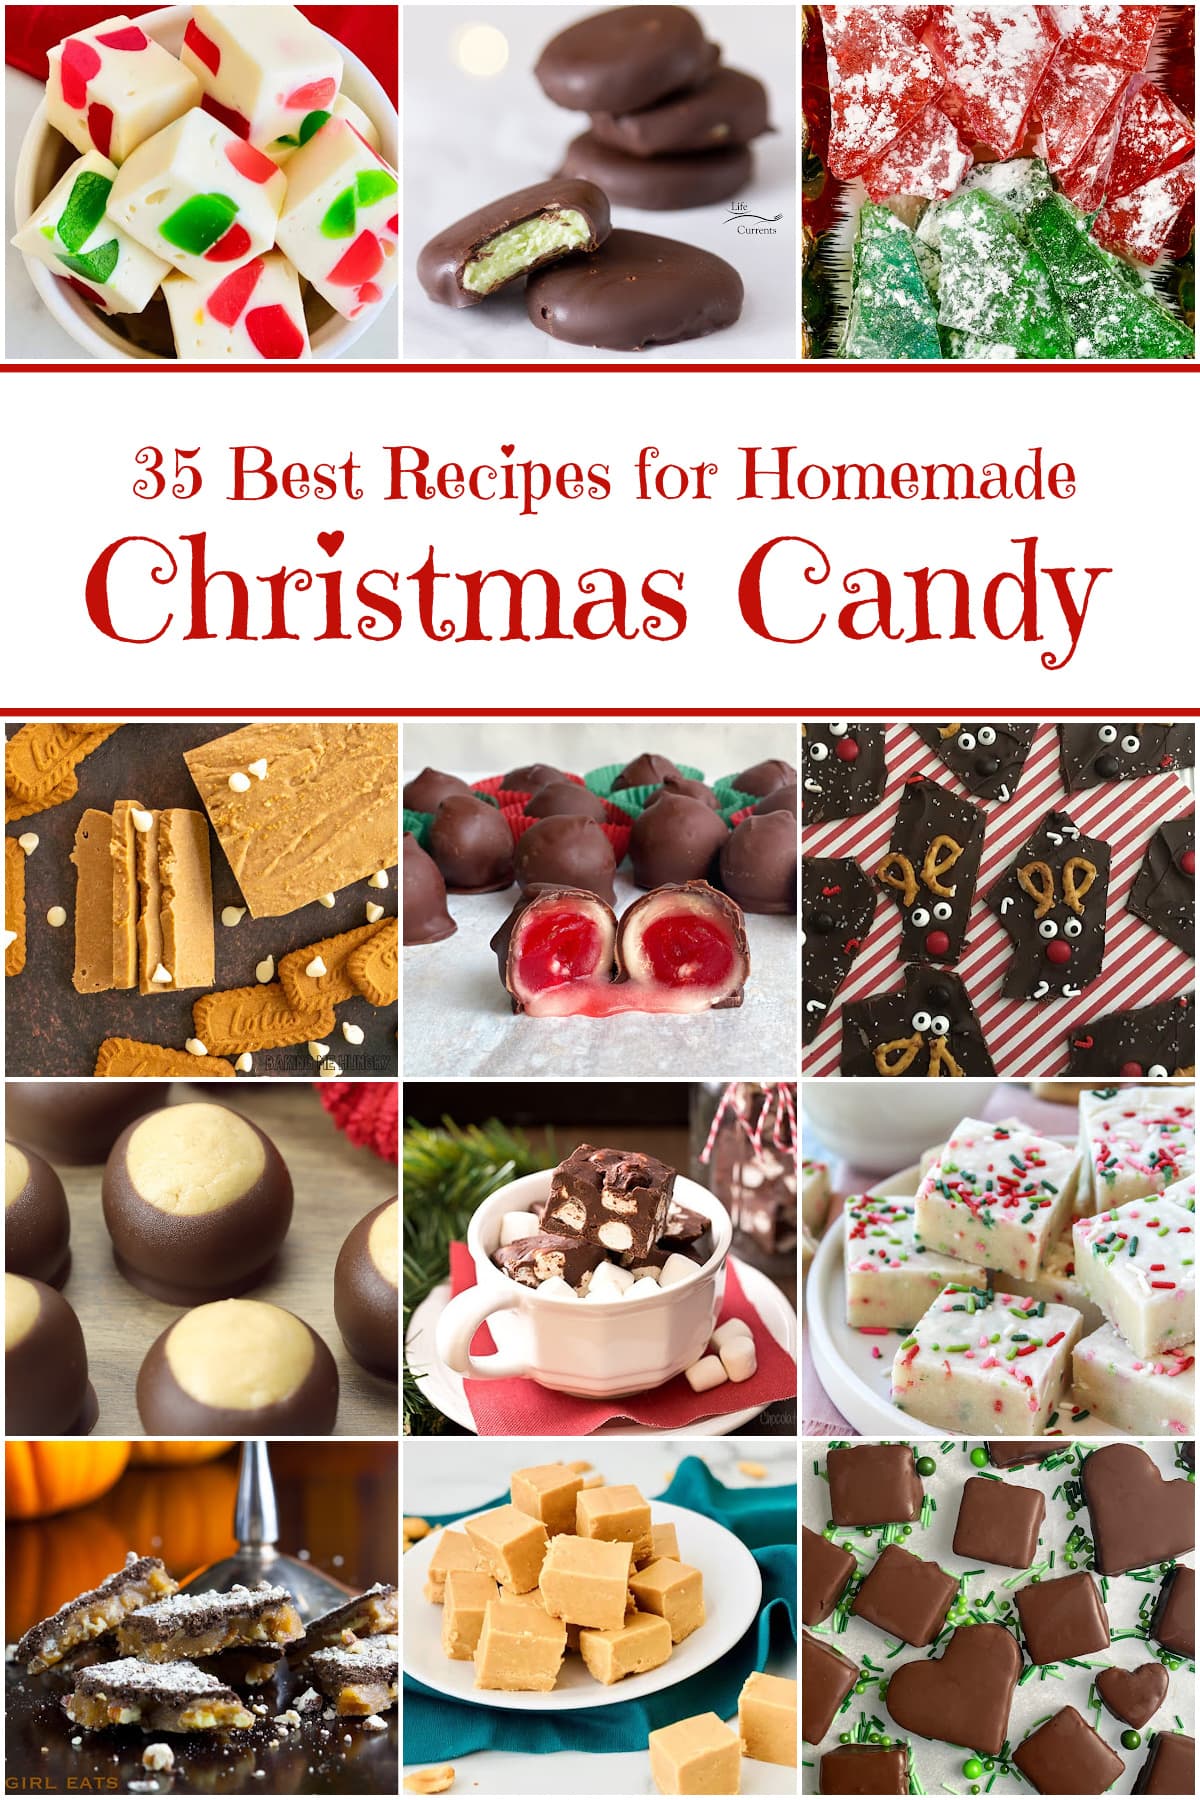 12-panel collage of different Christmas candy recipes in this collection. Pin text reads: 35 Best Recipes for Homemade Christmas Candy